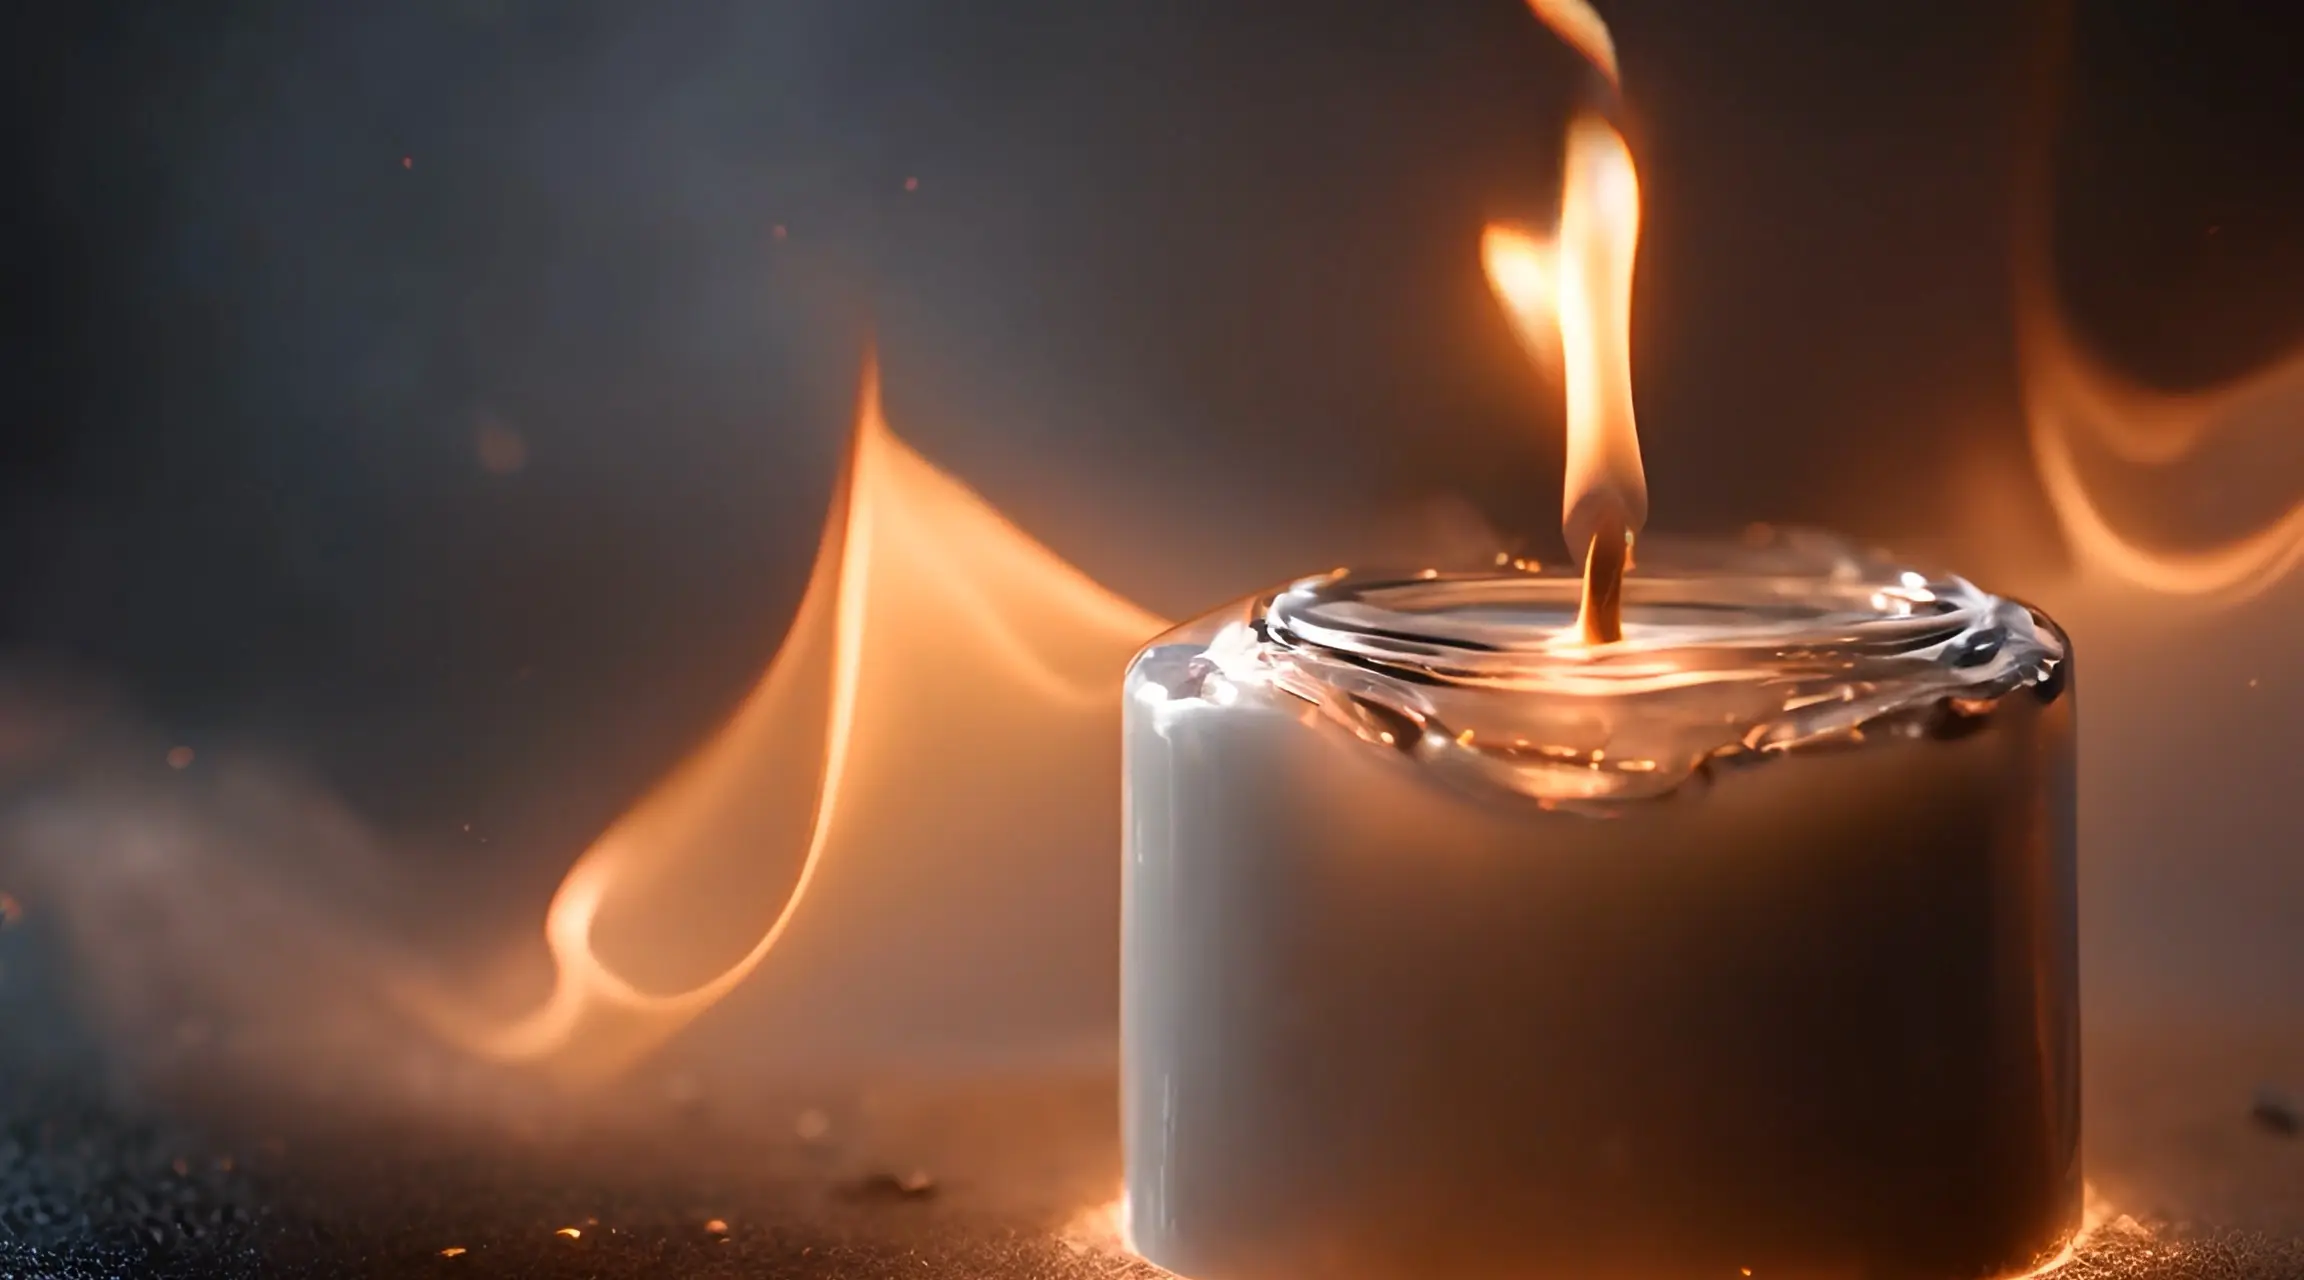 Gentle Flame Serenity Calming Candle Video